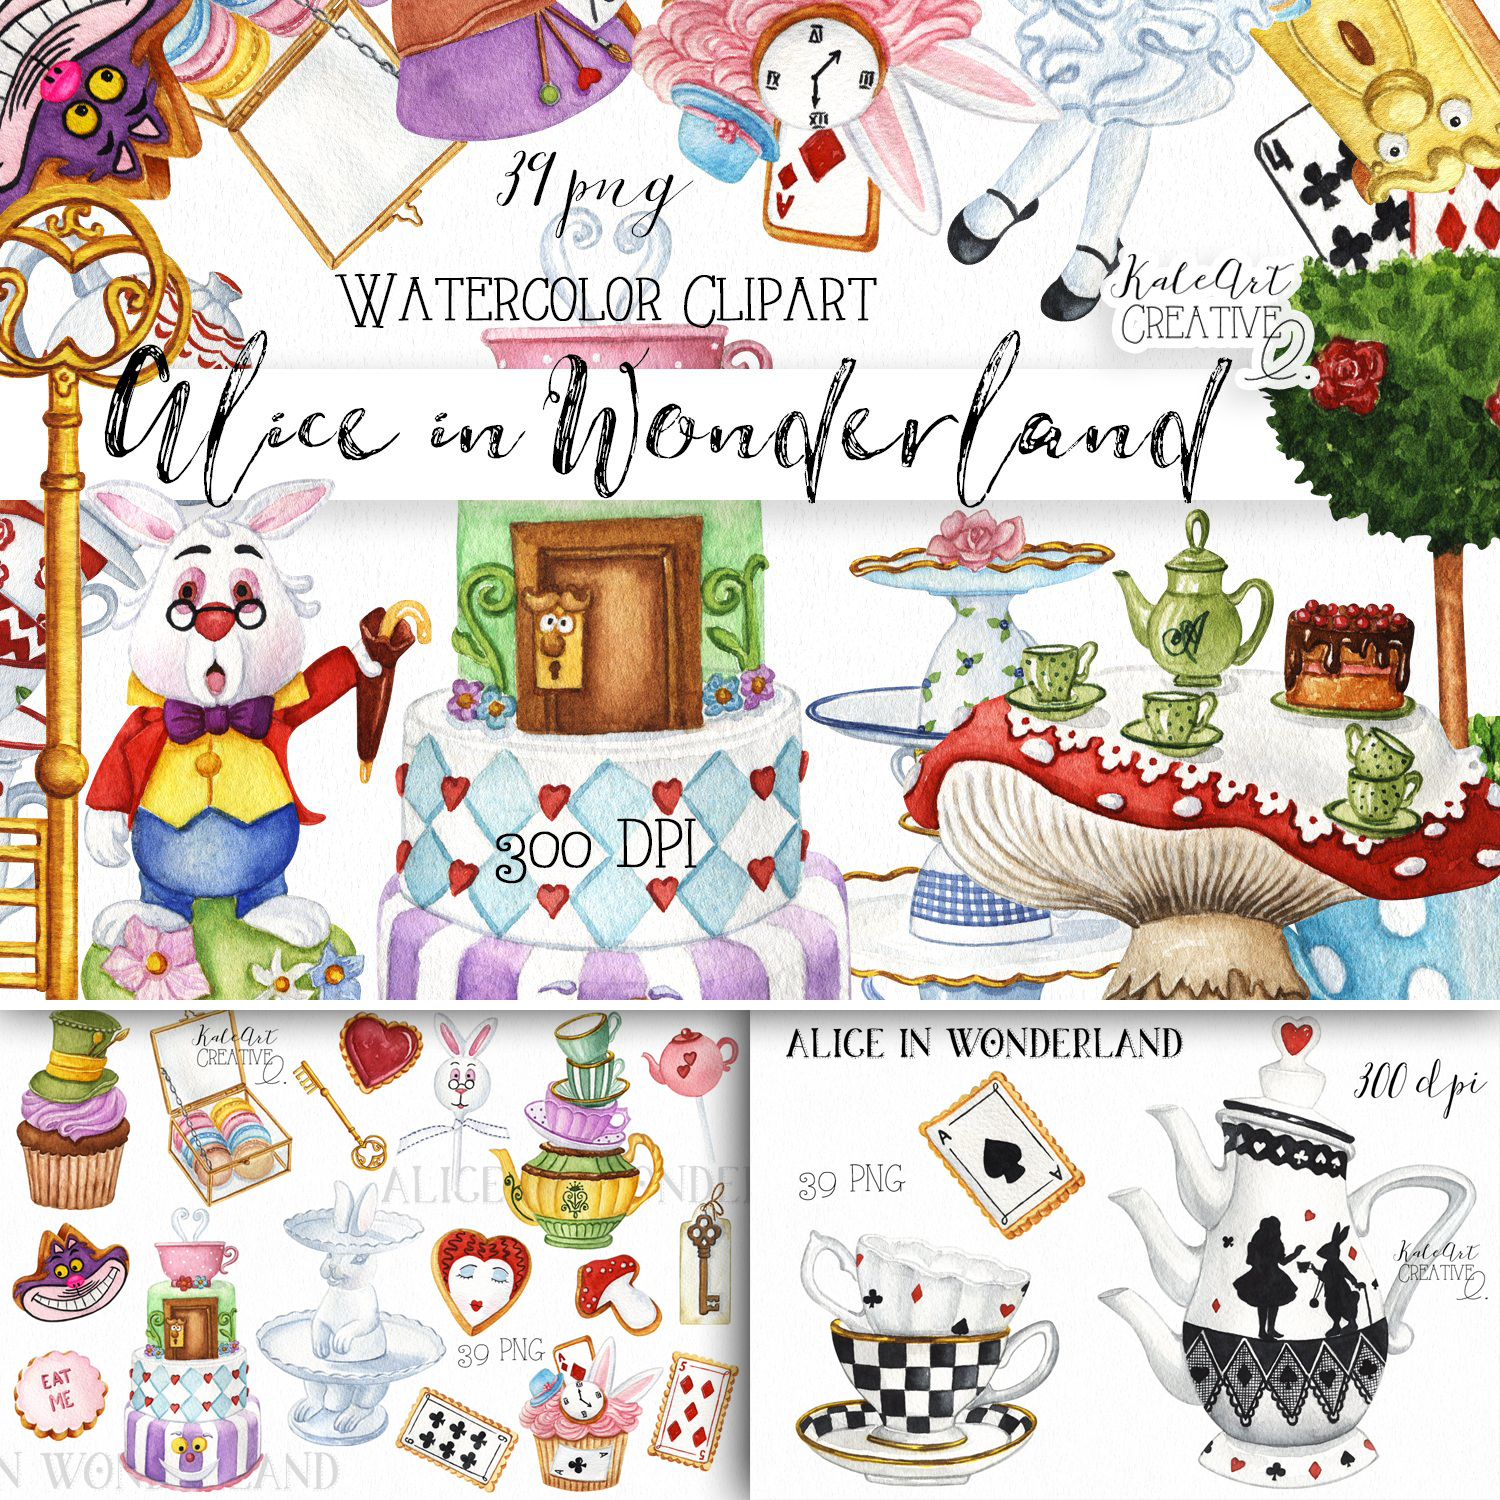 Prints of alice in wonderland sweets watercolor clipart.